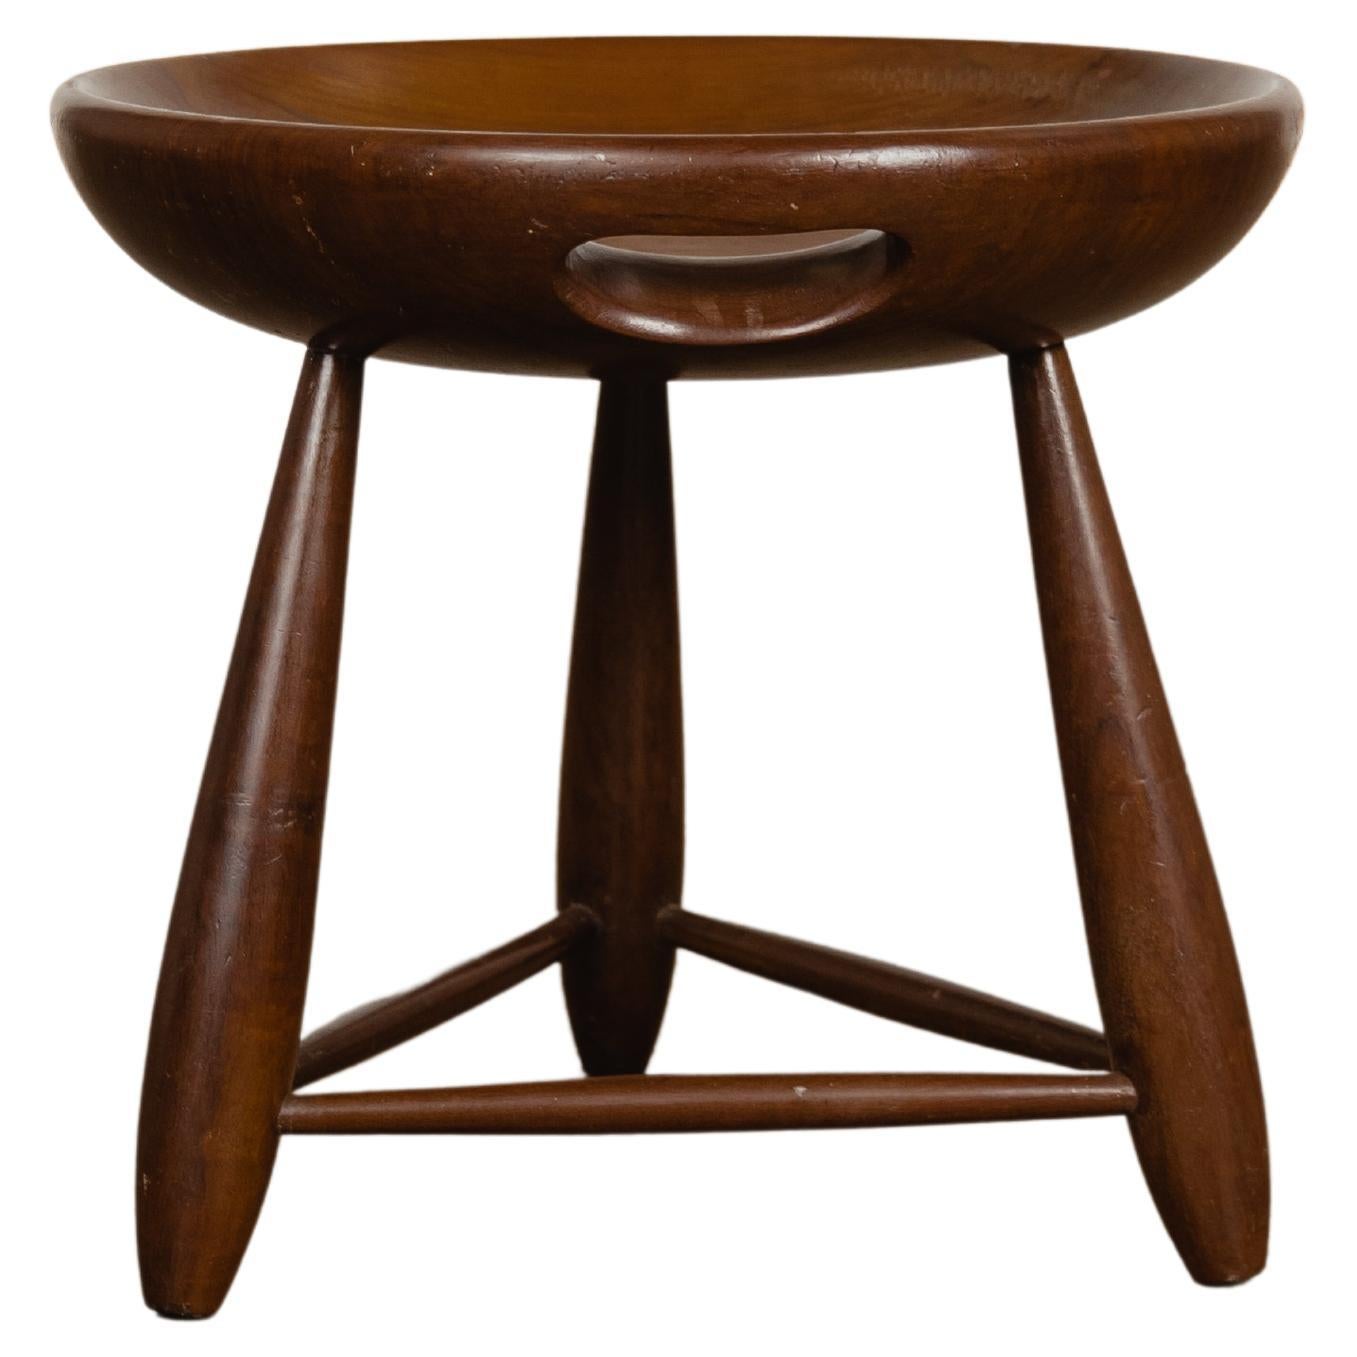 "Mocho" stool by Sergio Rodrigues For Sale